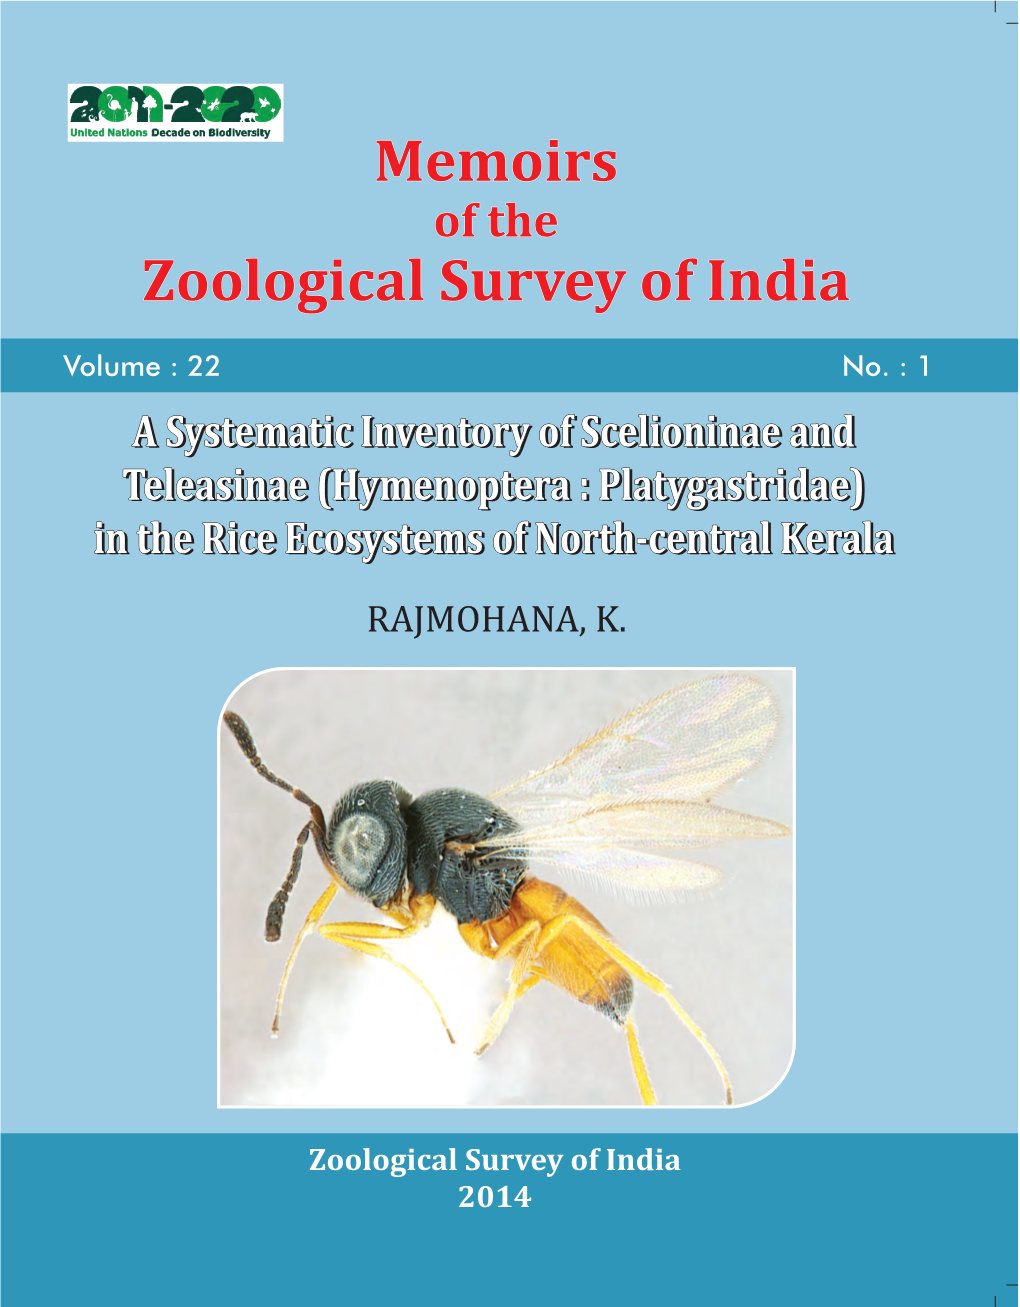 Memoirs of the Zoological Survey of India